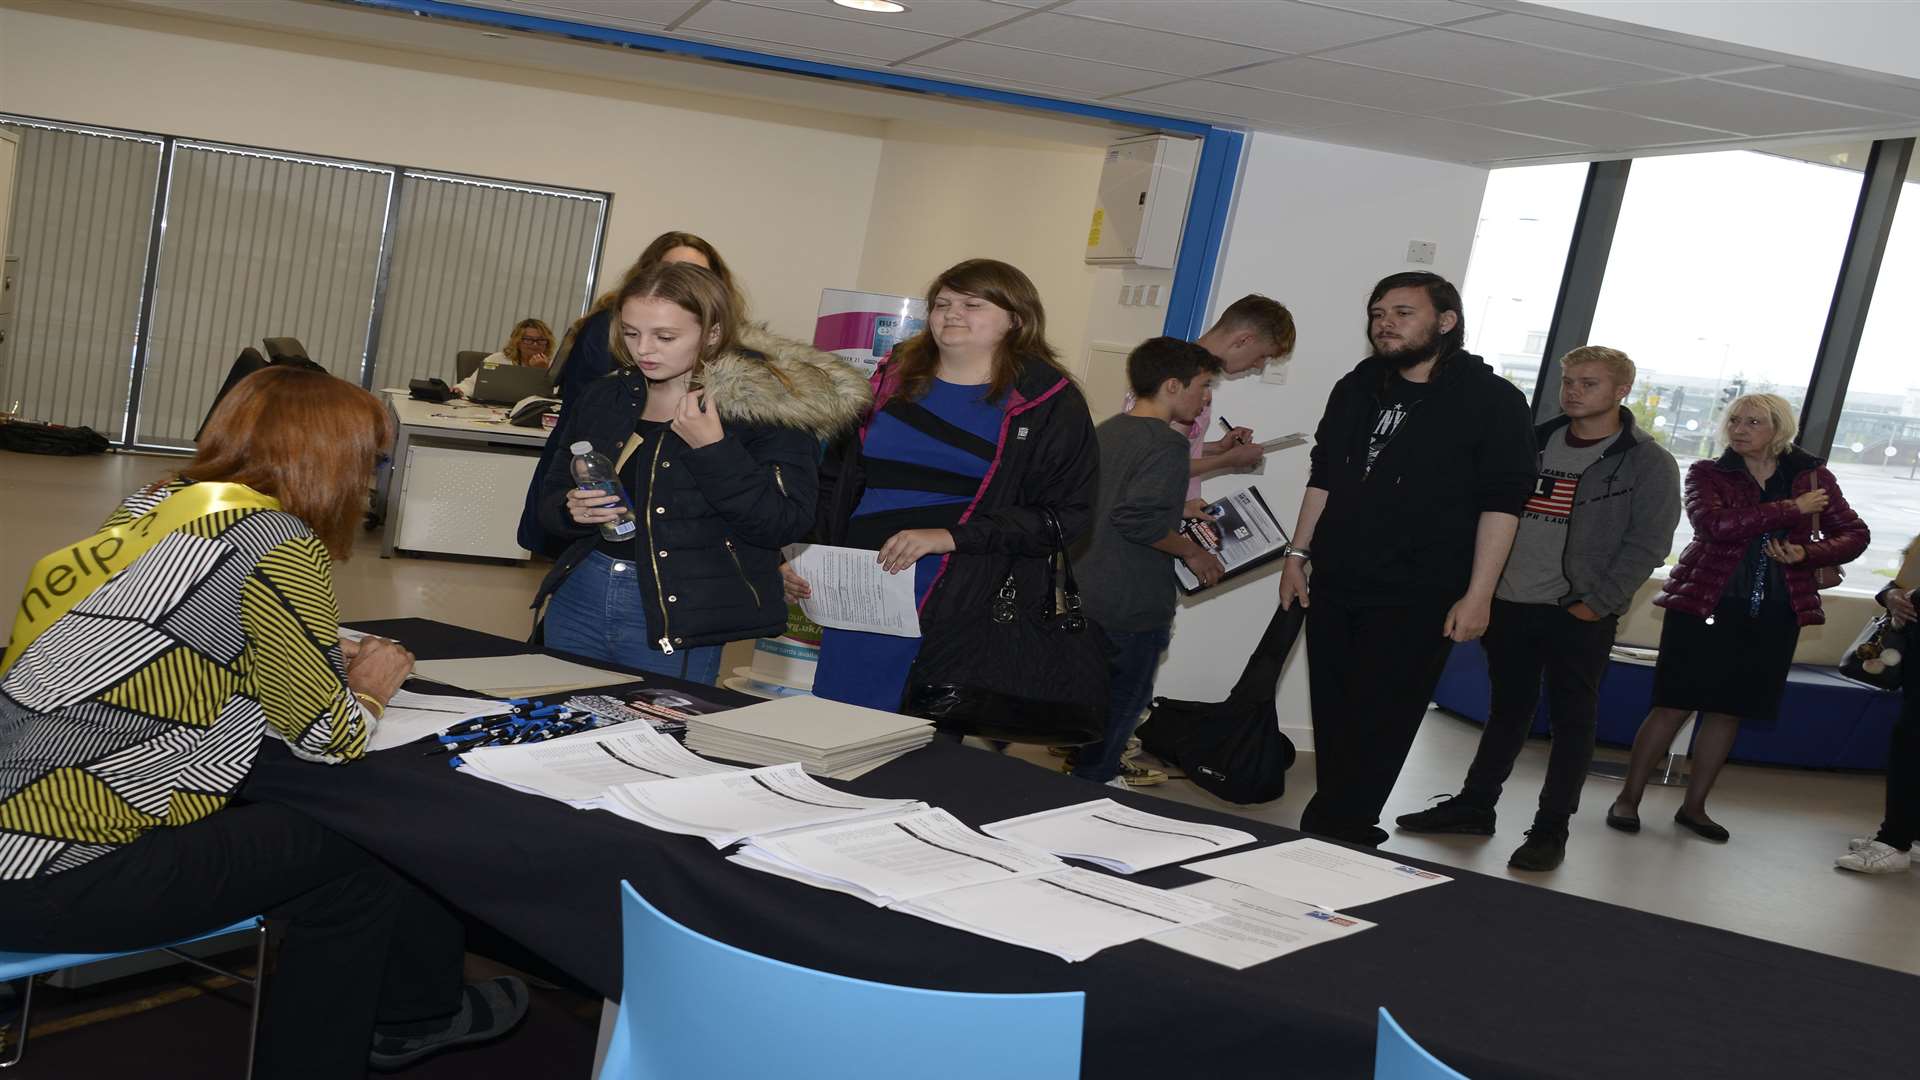 Students enrolling at the new Ashford College